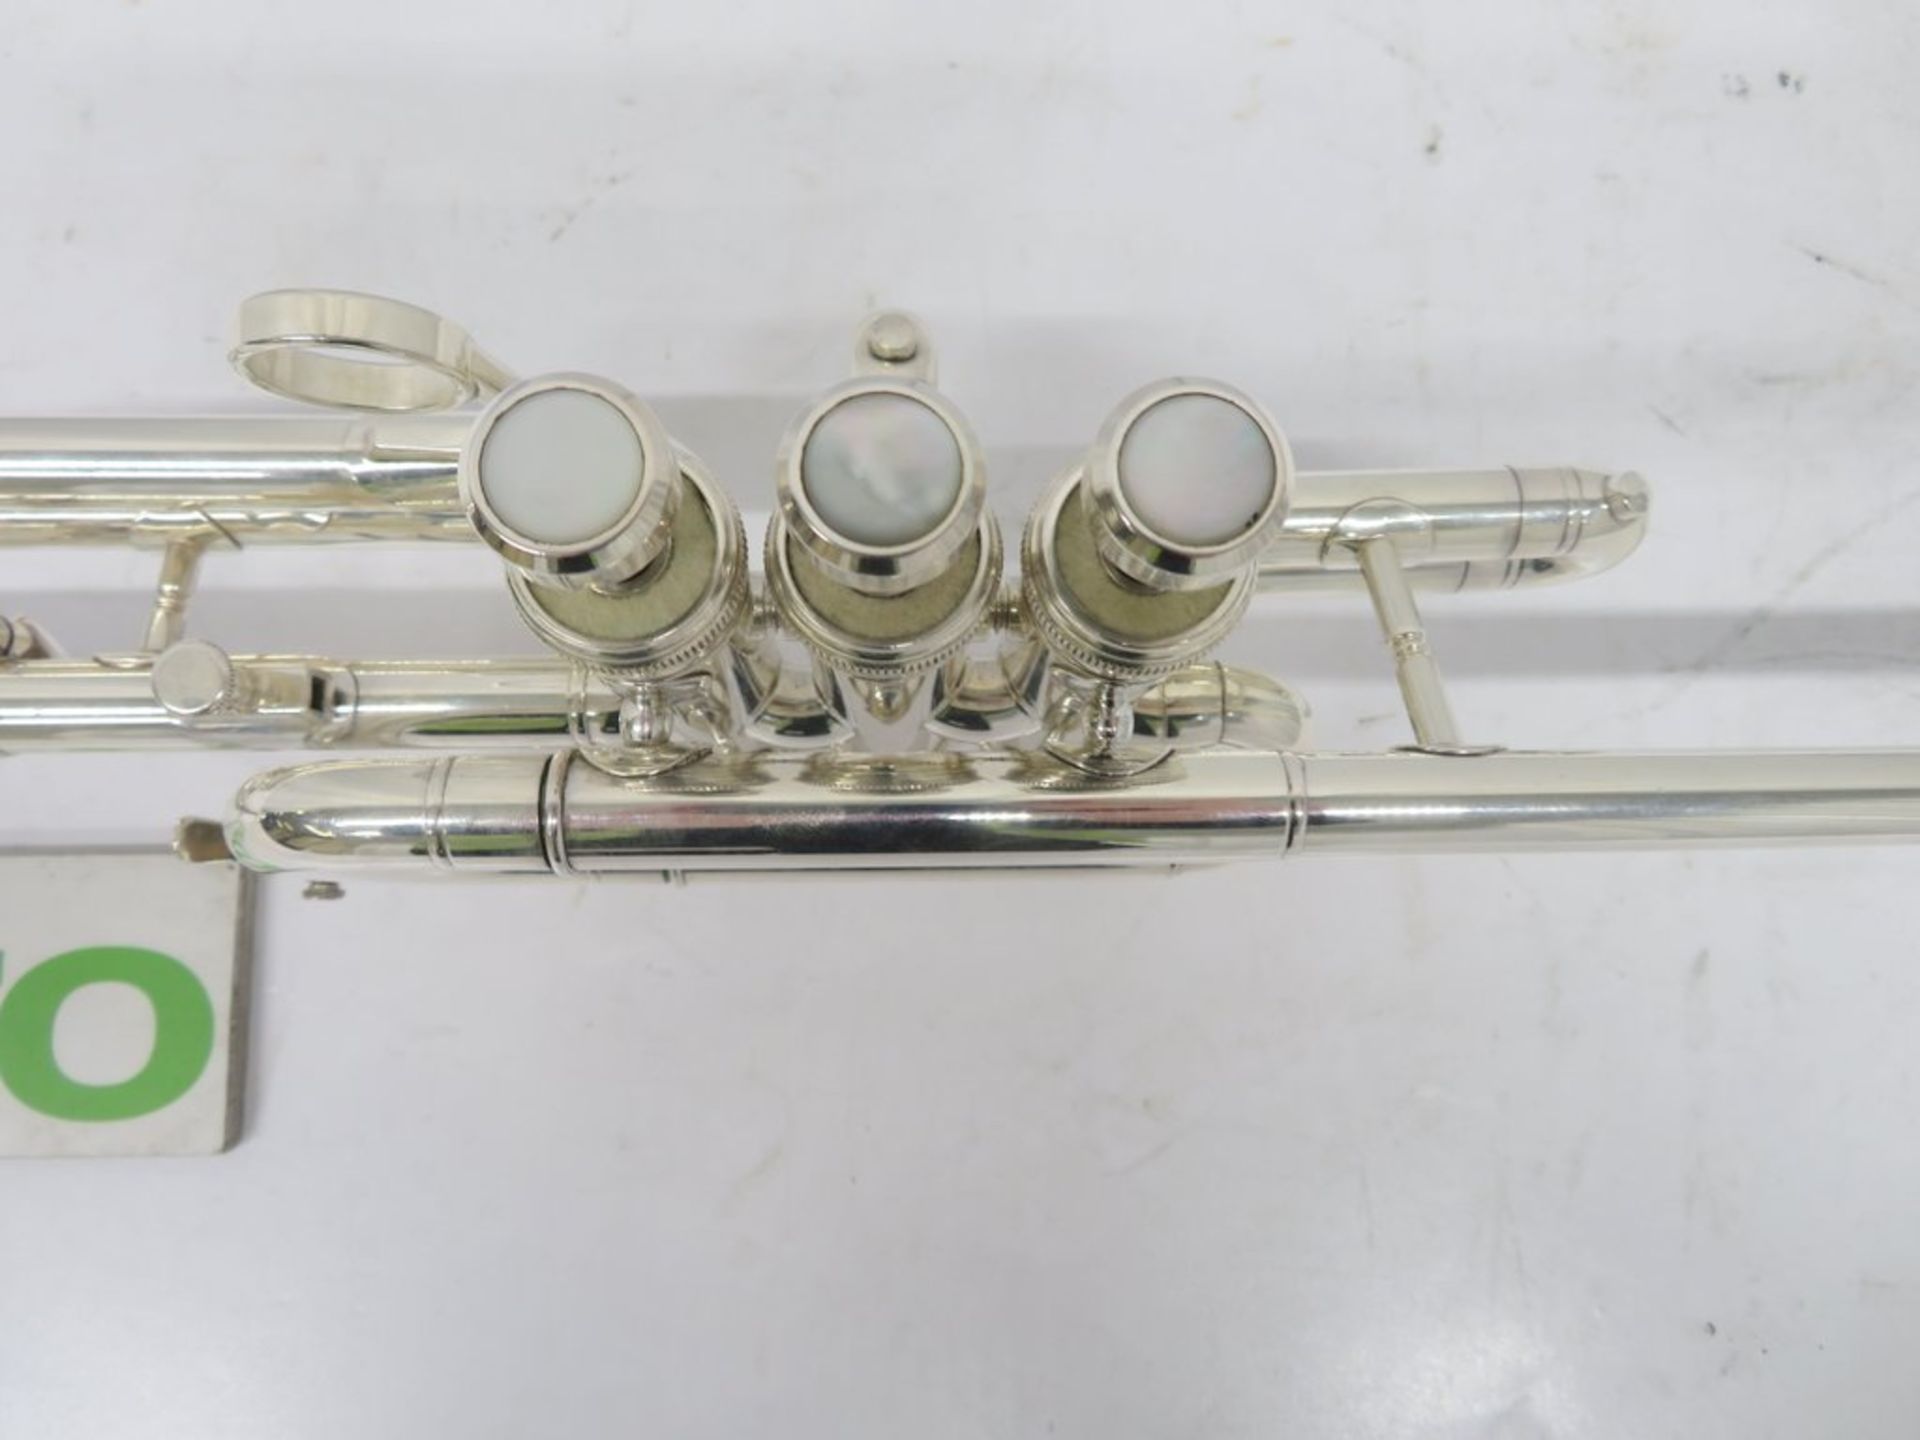 Besson International BE706 Fanfare Trumpet With Case. Serial Number: 842946. Please Note T - Image 8 of 14